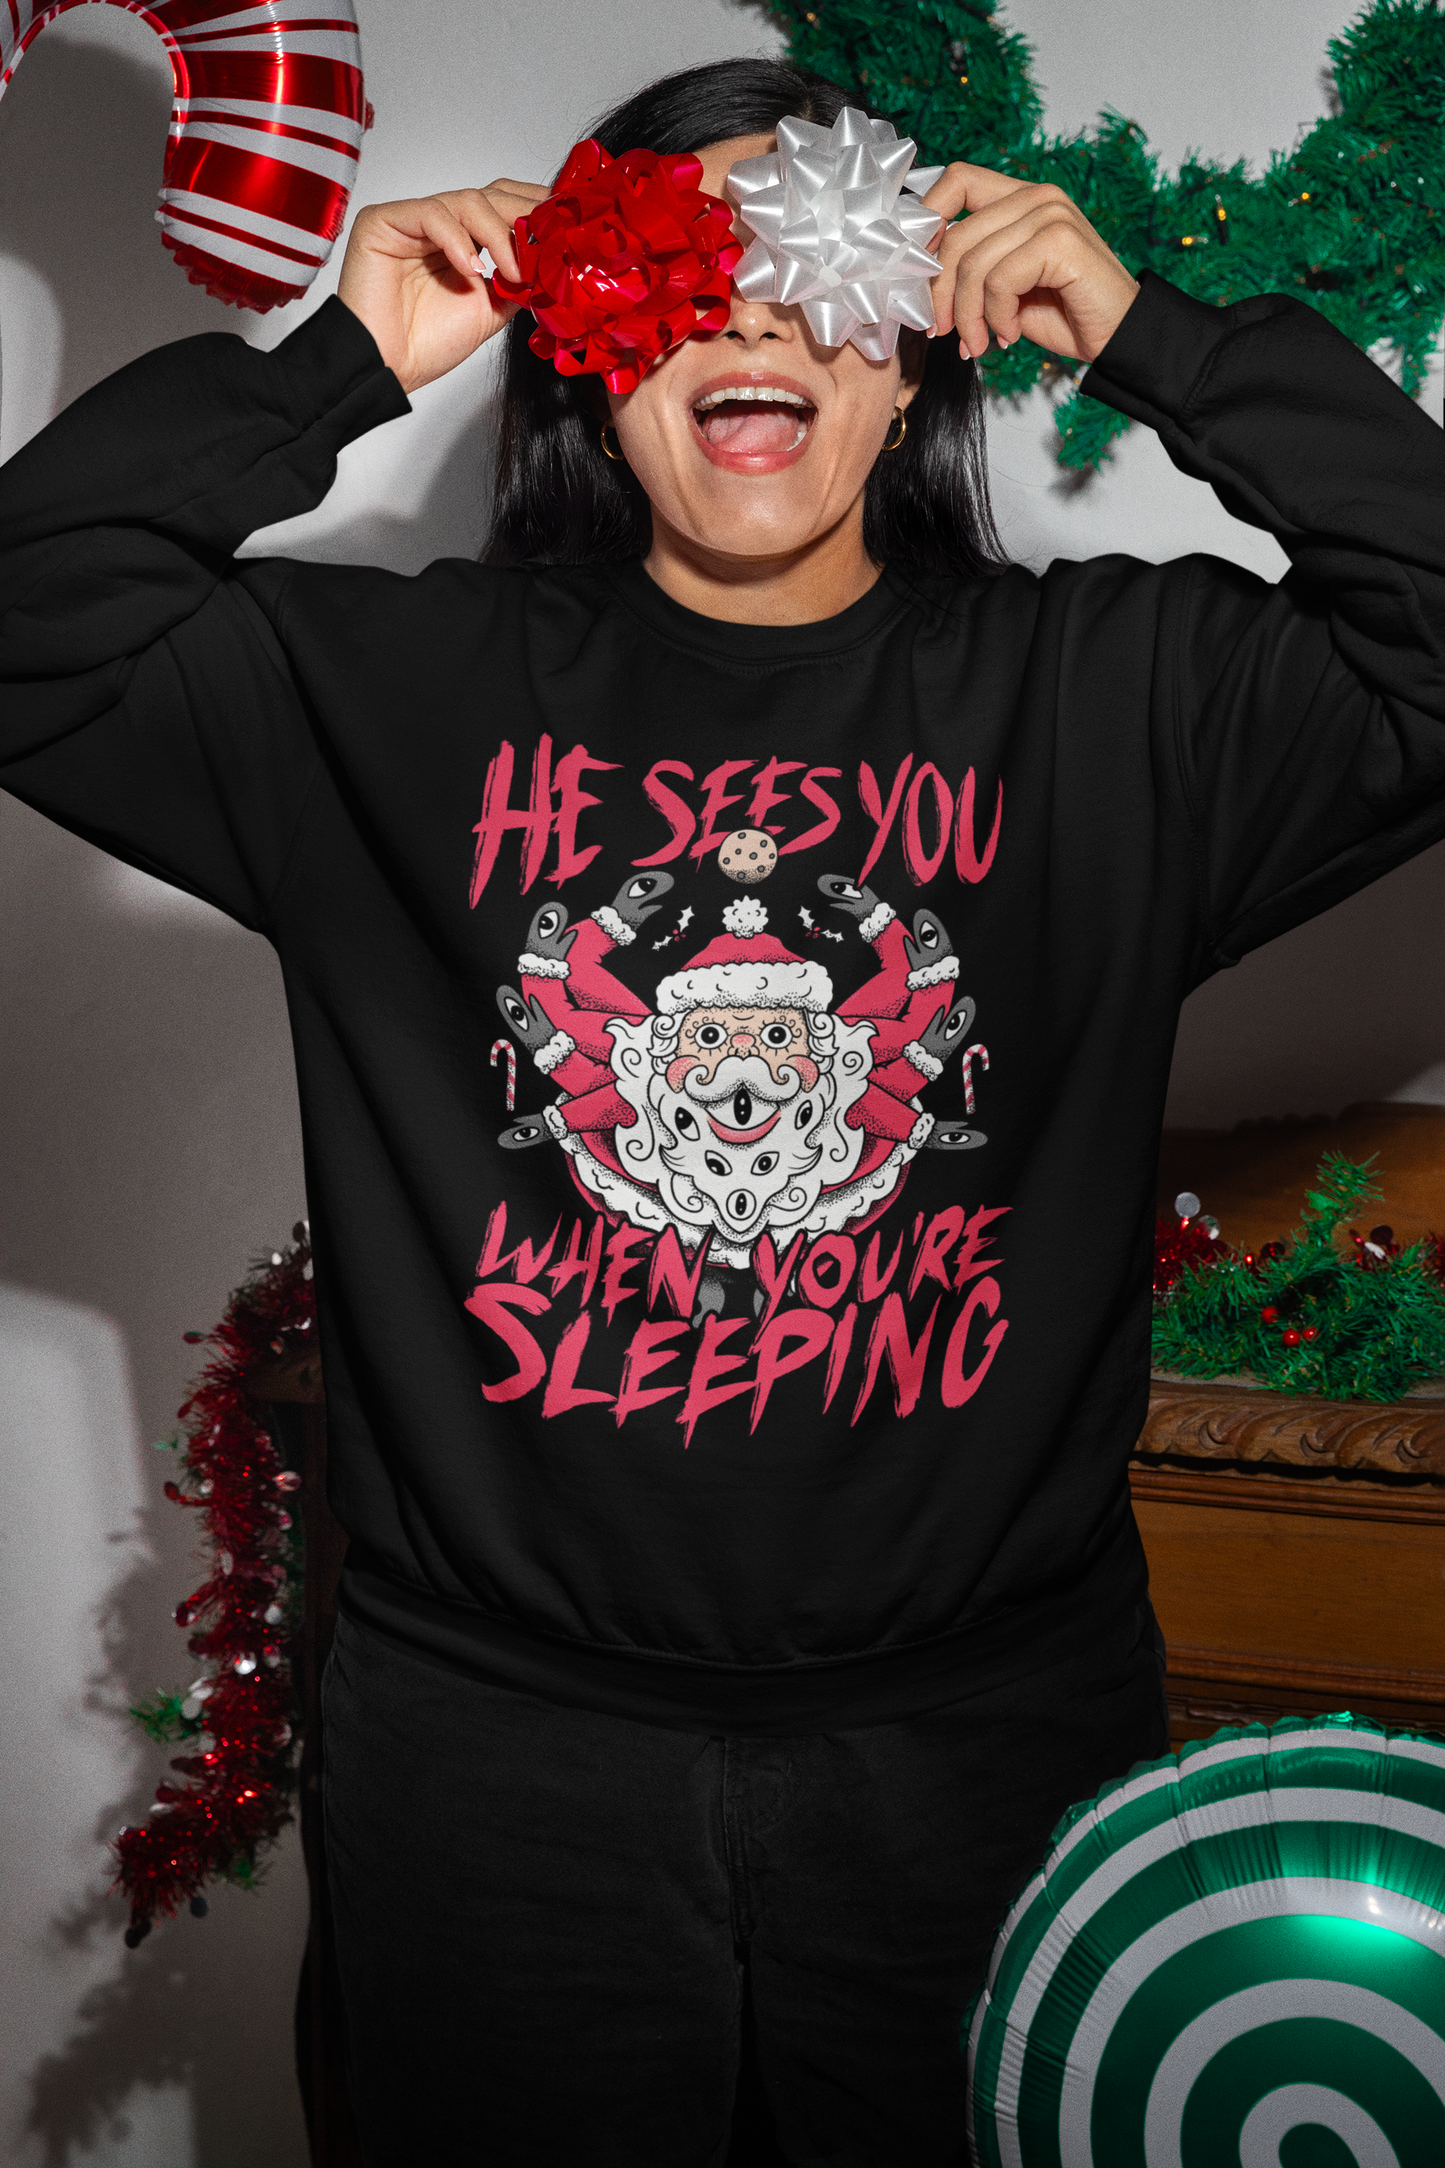 He Sees You When You're Sleeping - Funny Christmas Sweater